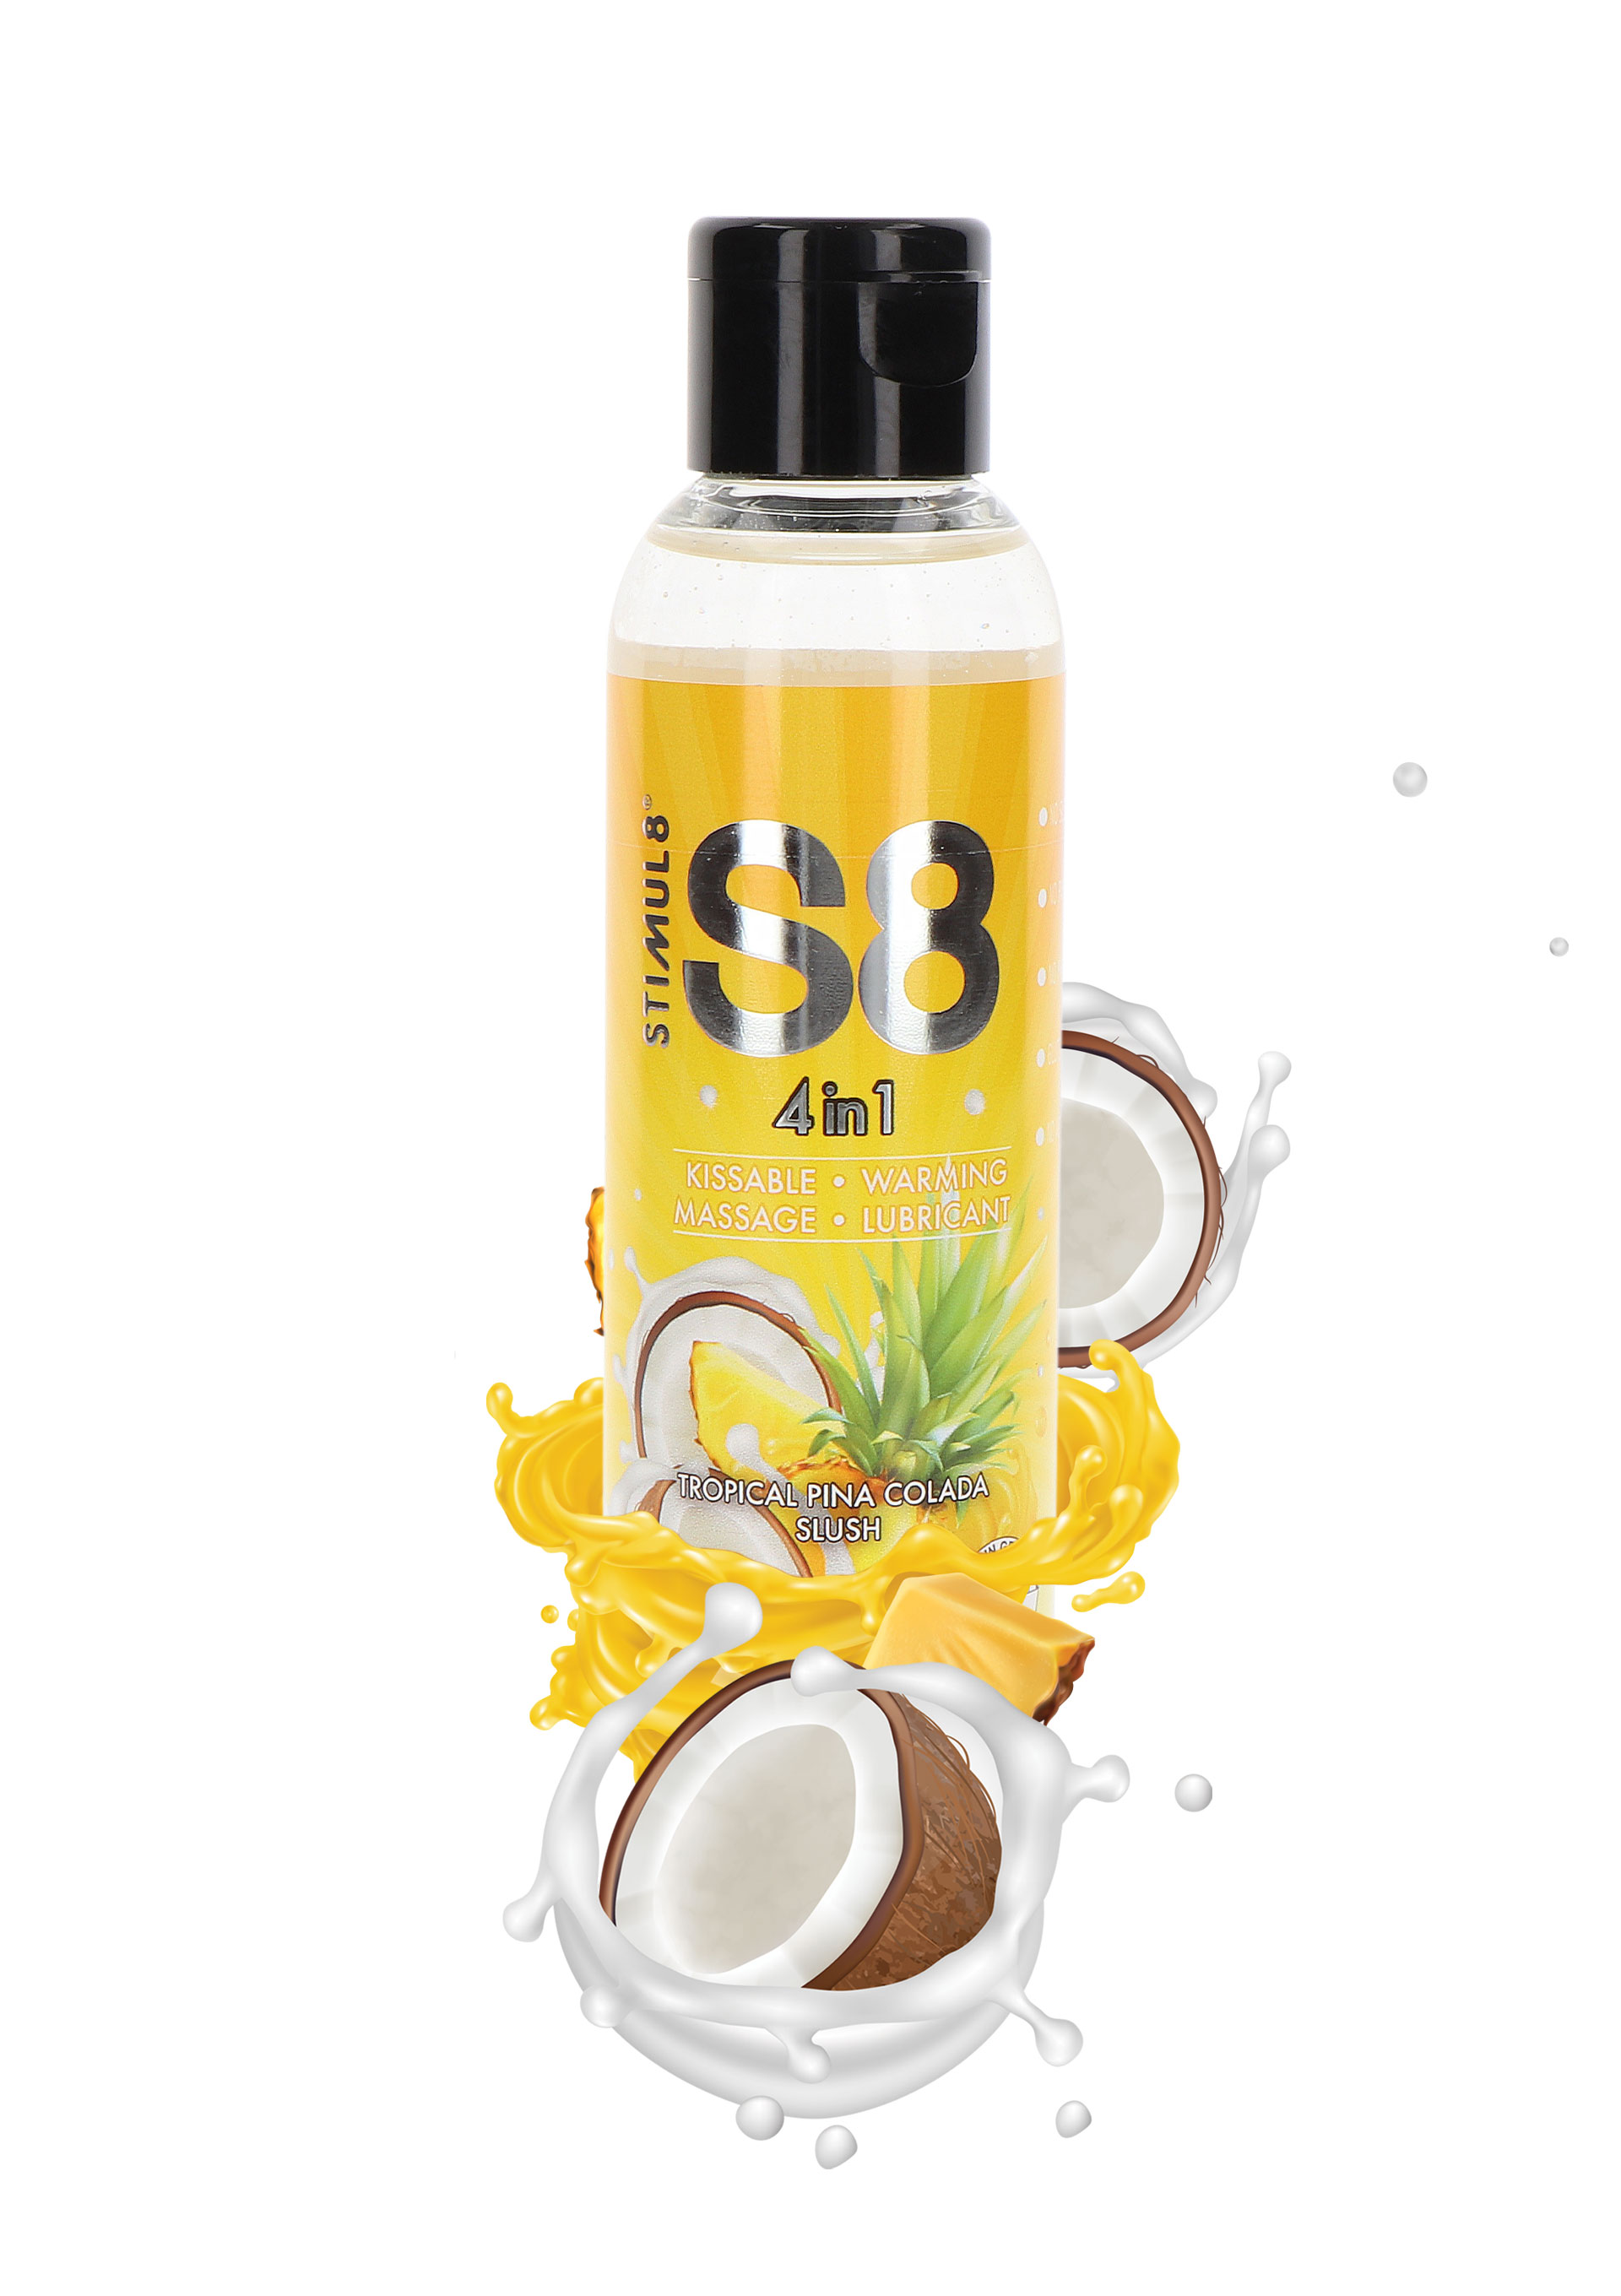 S8 4in1 Tropical Pina Colada-125ml.